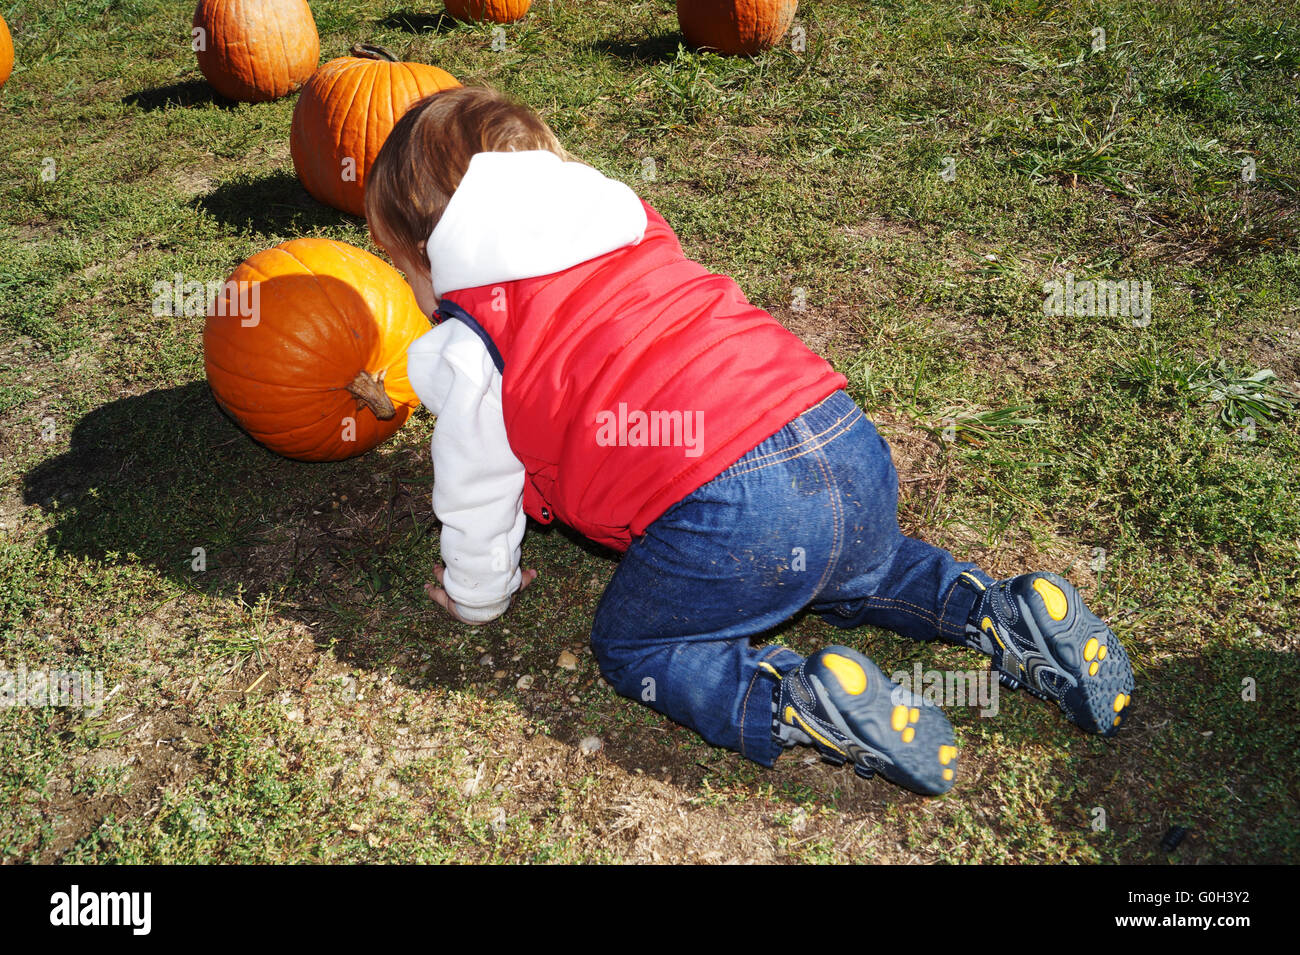 A boy picking up a pumpkin or trying to Stock Photo